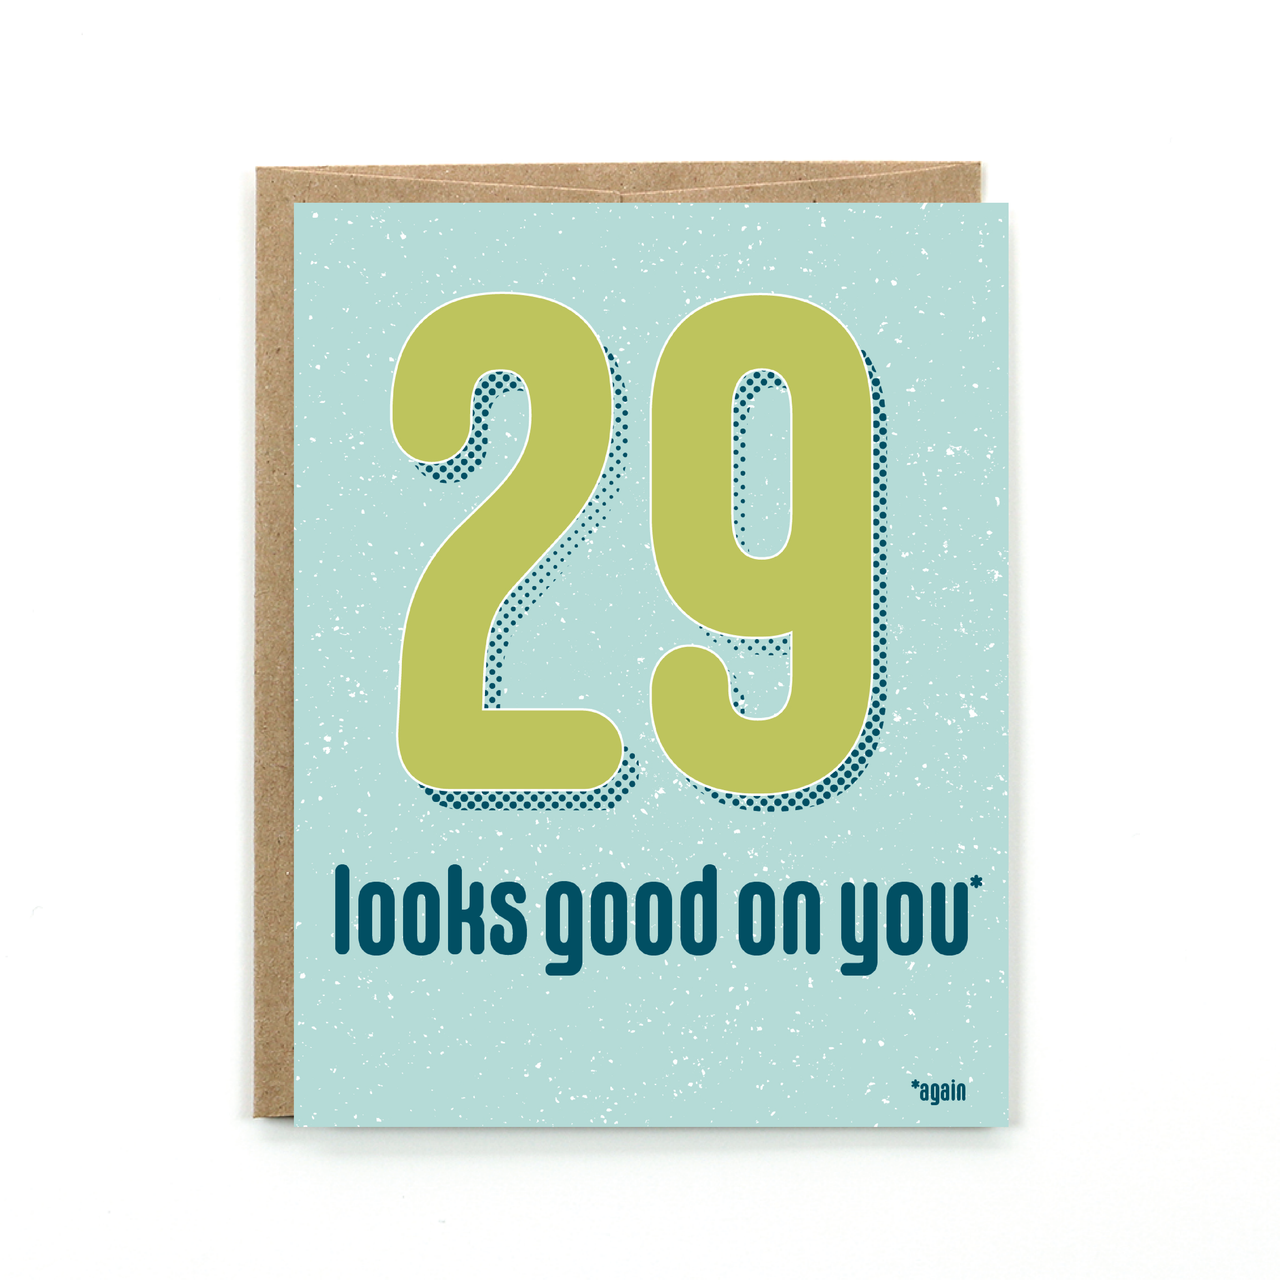 29 looks good on you *again. Happy Birthday! This teal and green card is the perfect, funny way to wish that special someone a happy birthday. Even if they are 29 again.